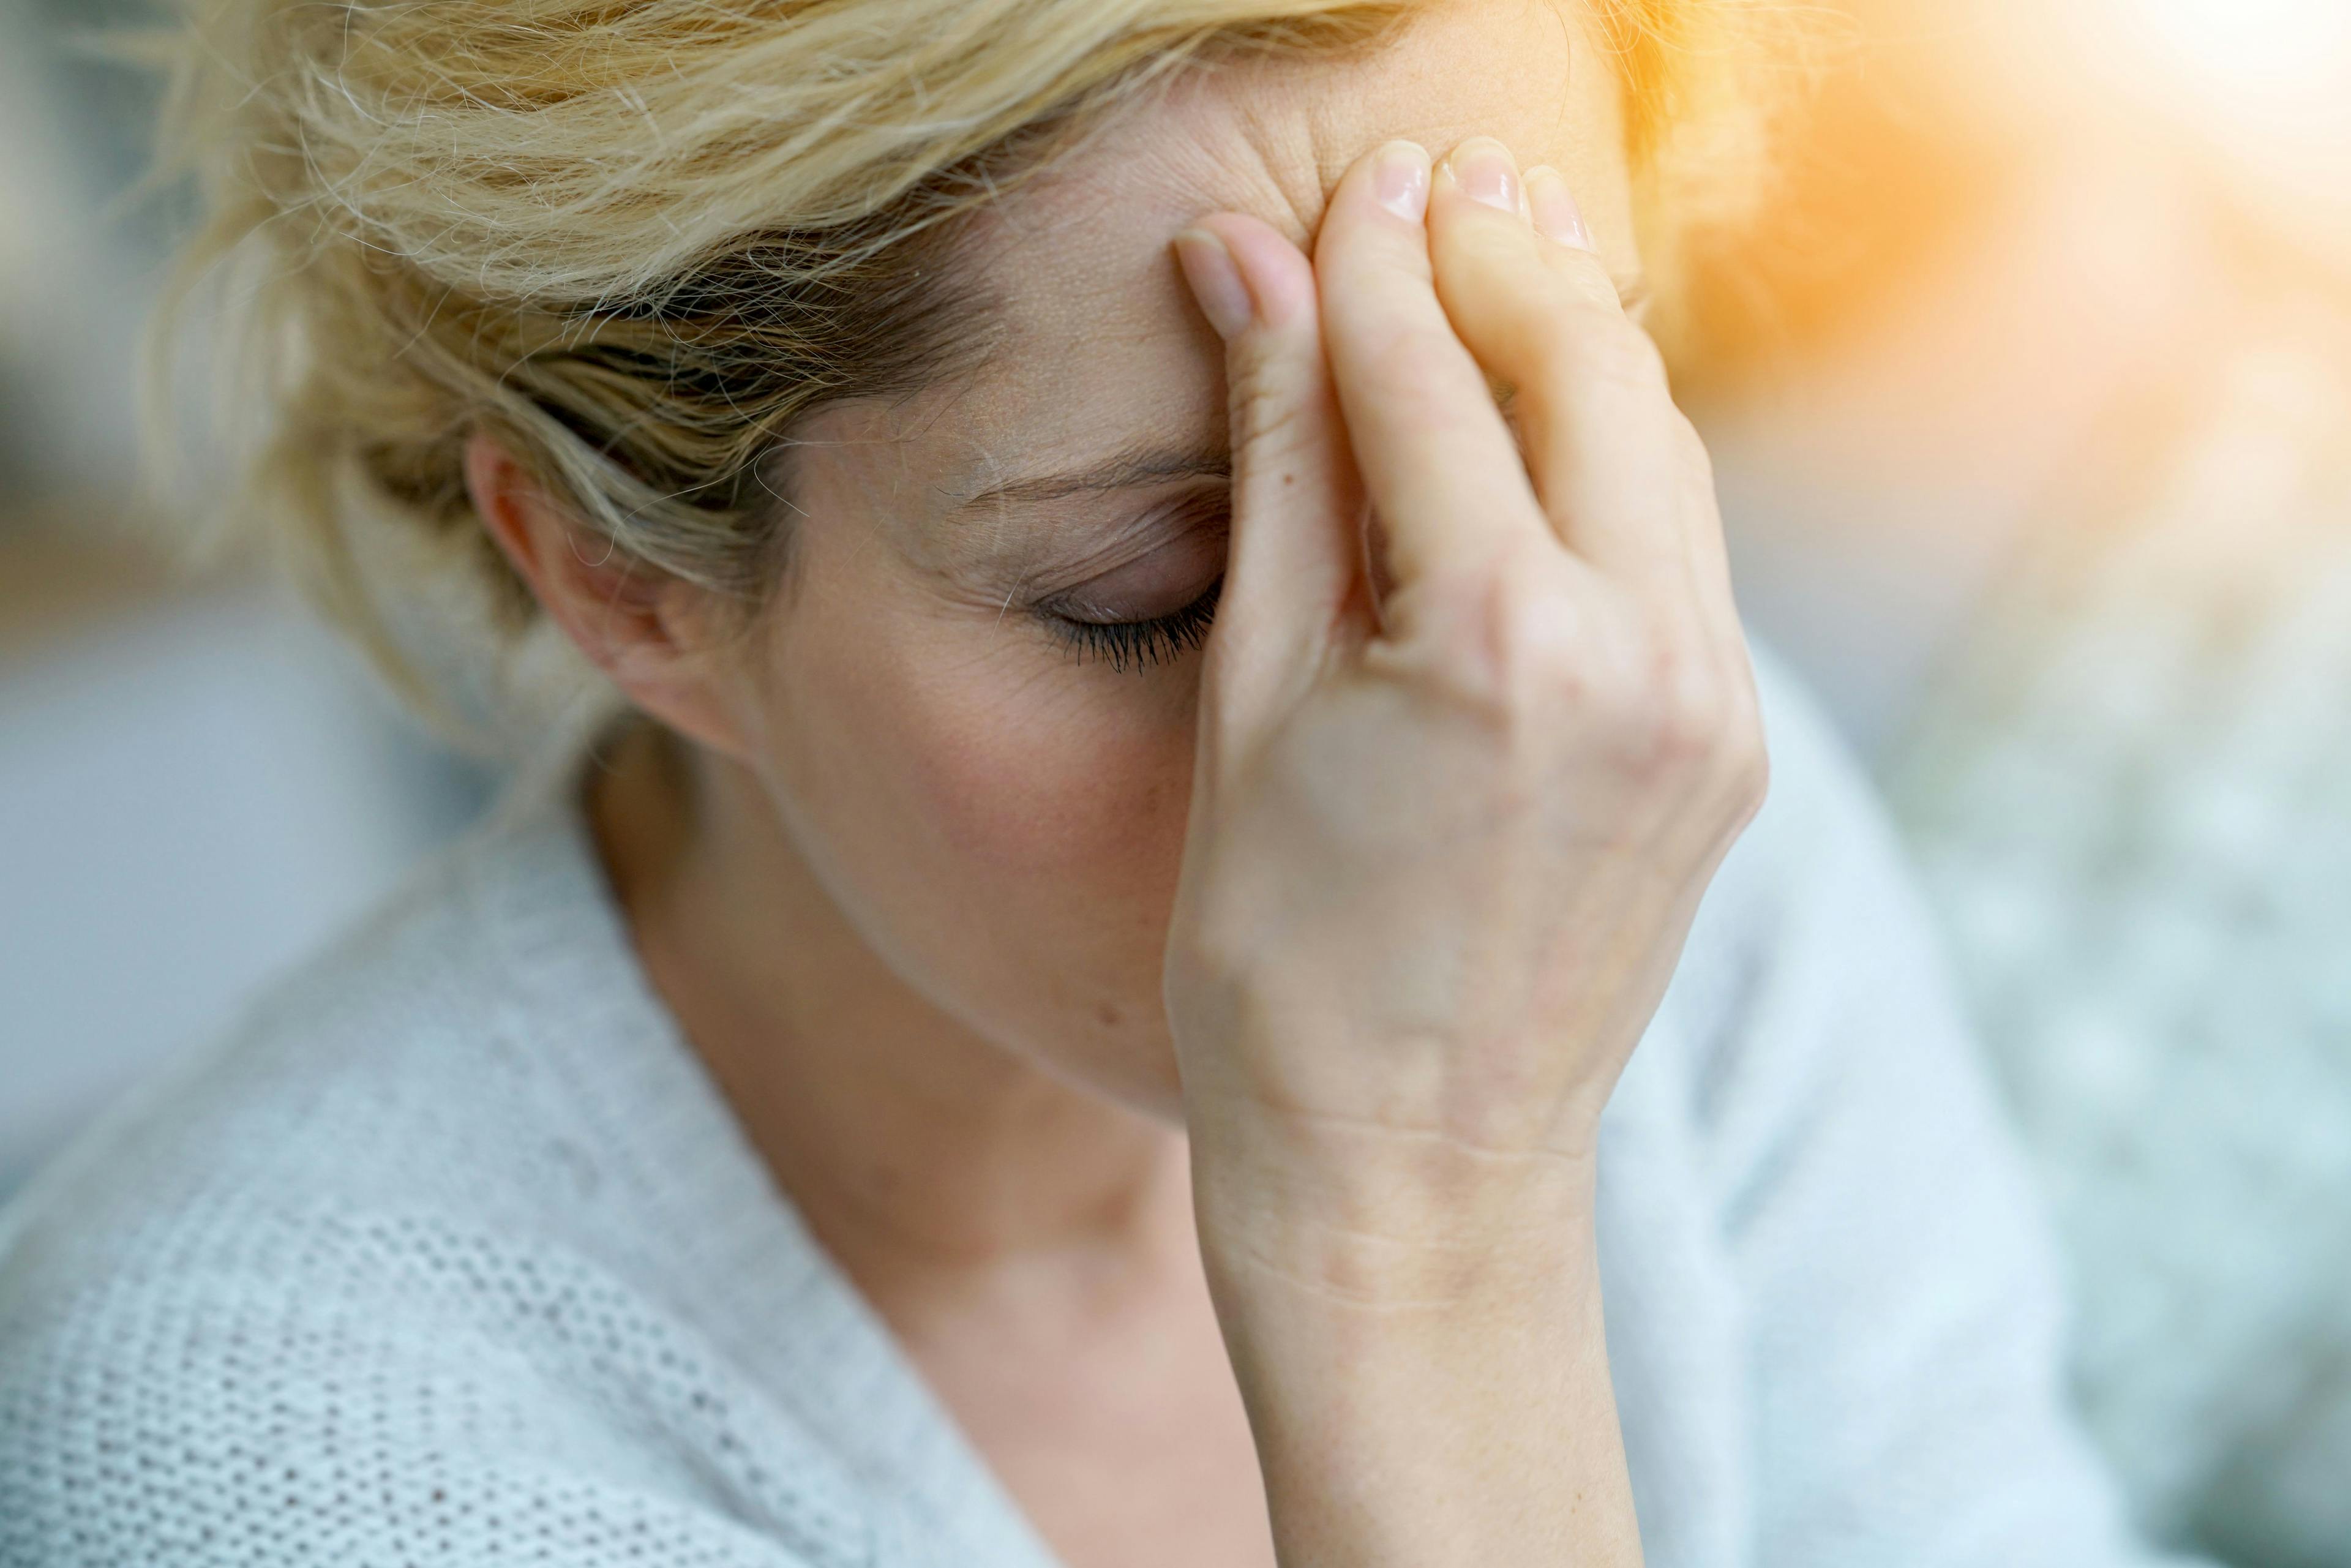 Multiple Vitamin Deficiencies Associated with Worse Migraine Outcomes